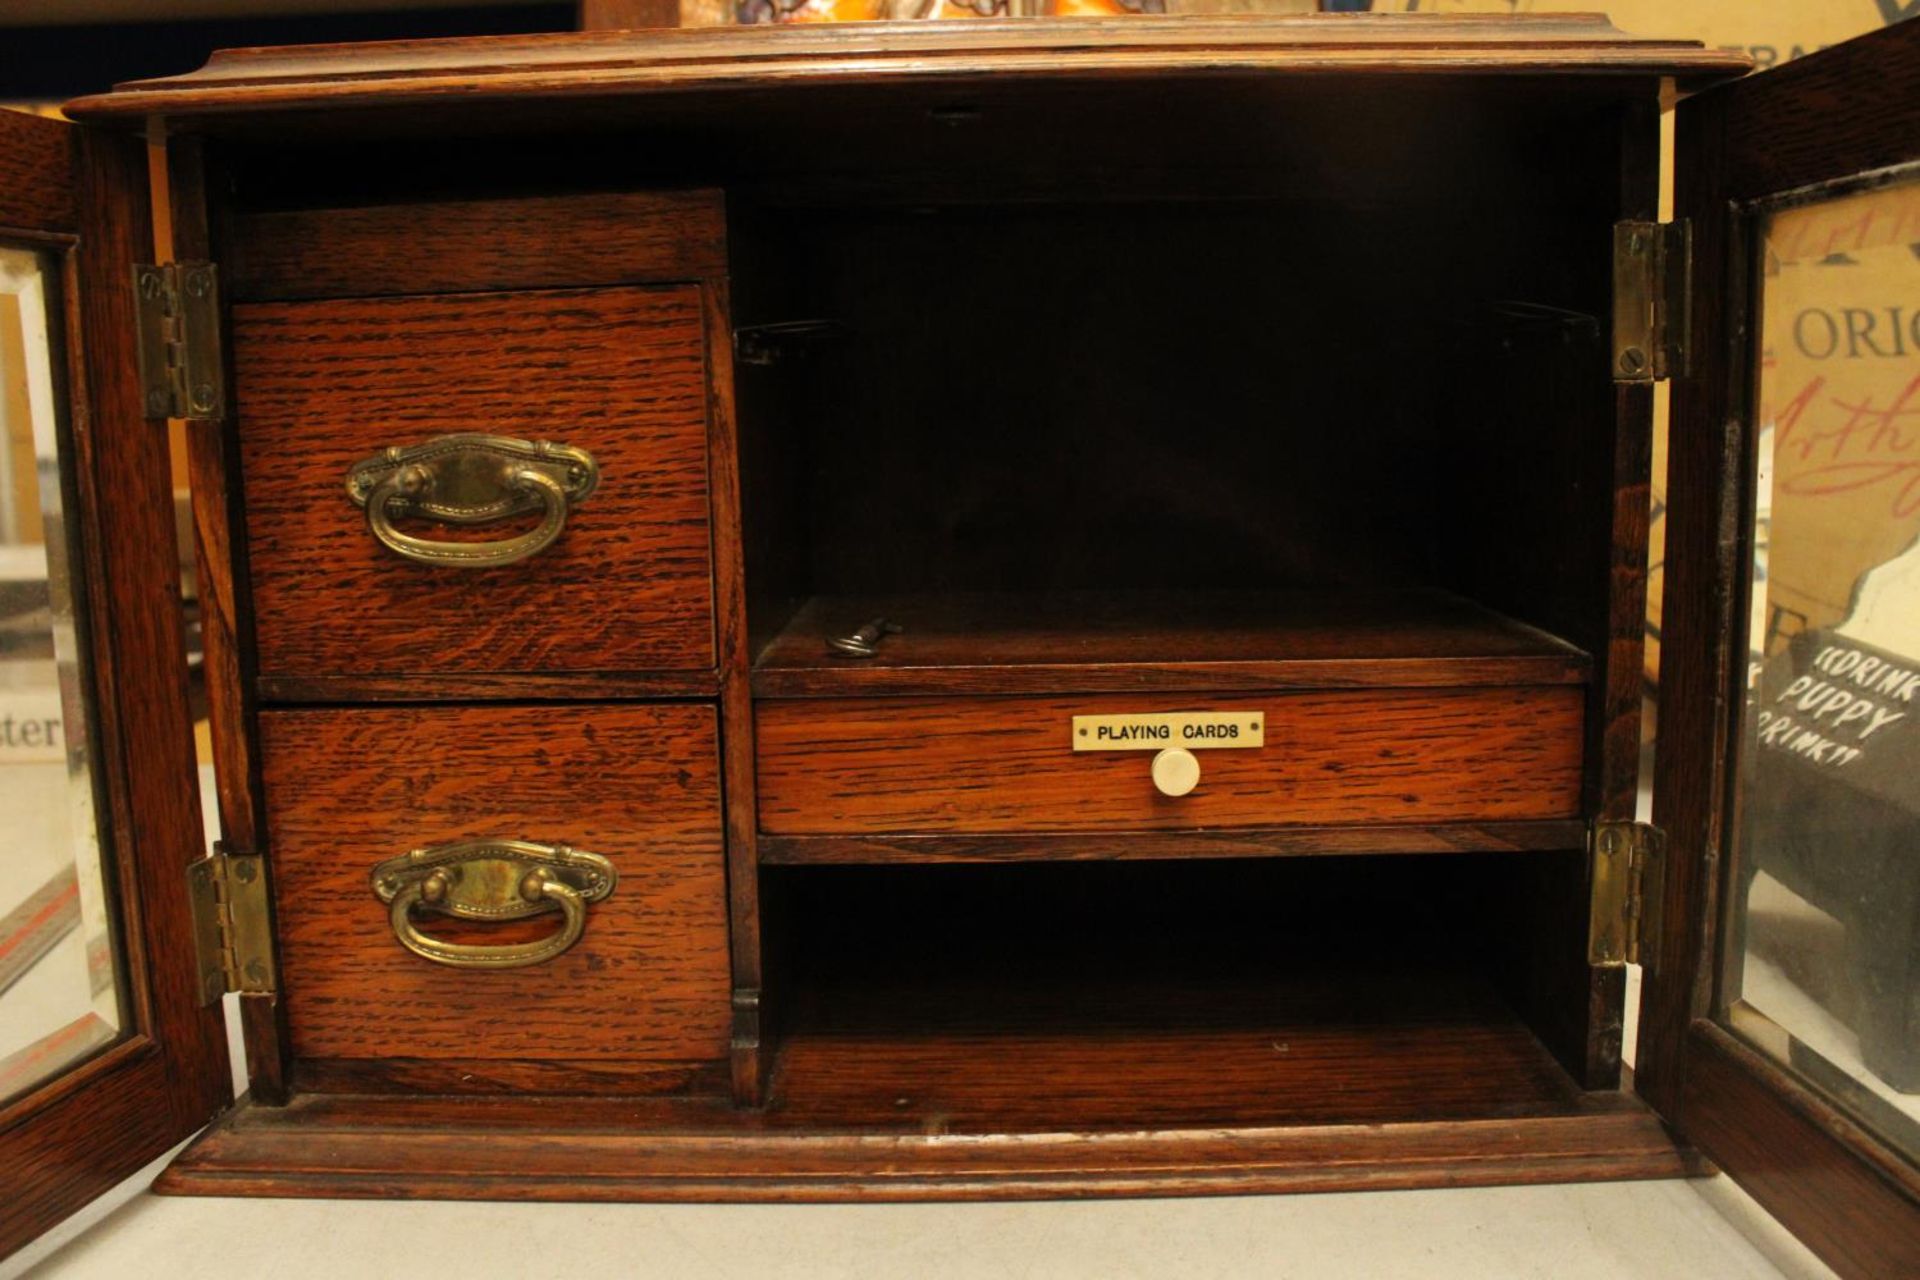 AN OAK TWO GLASS DOOR SMOKERS CABINET WITH THREE INTERIOR DRAWERS ONE LABELED PLAYING CARDS COMPLETE - Image 2 of 4